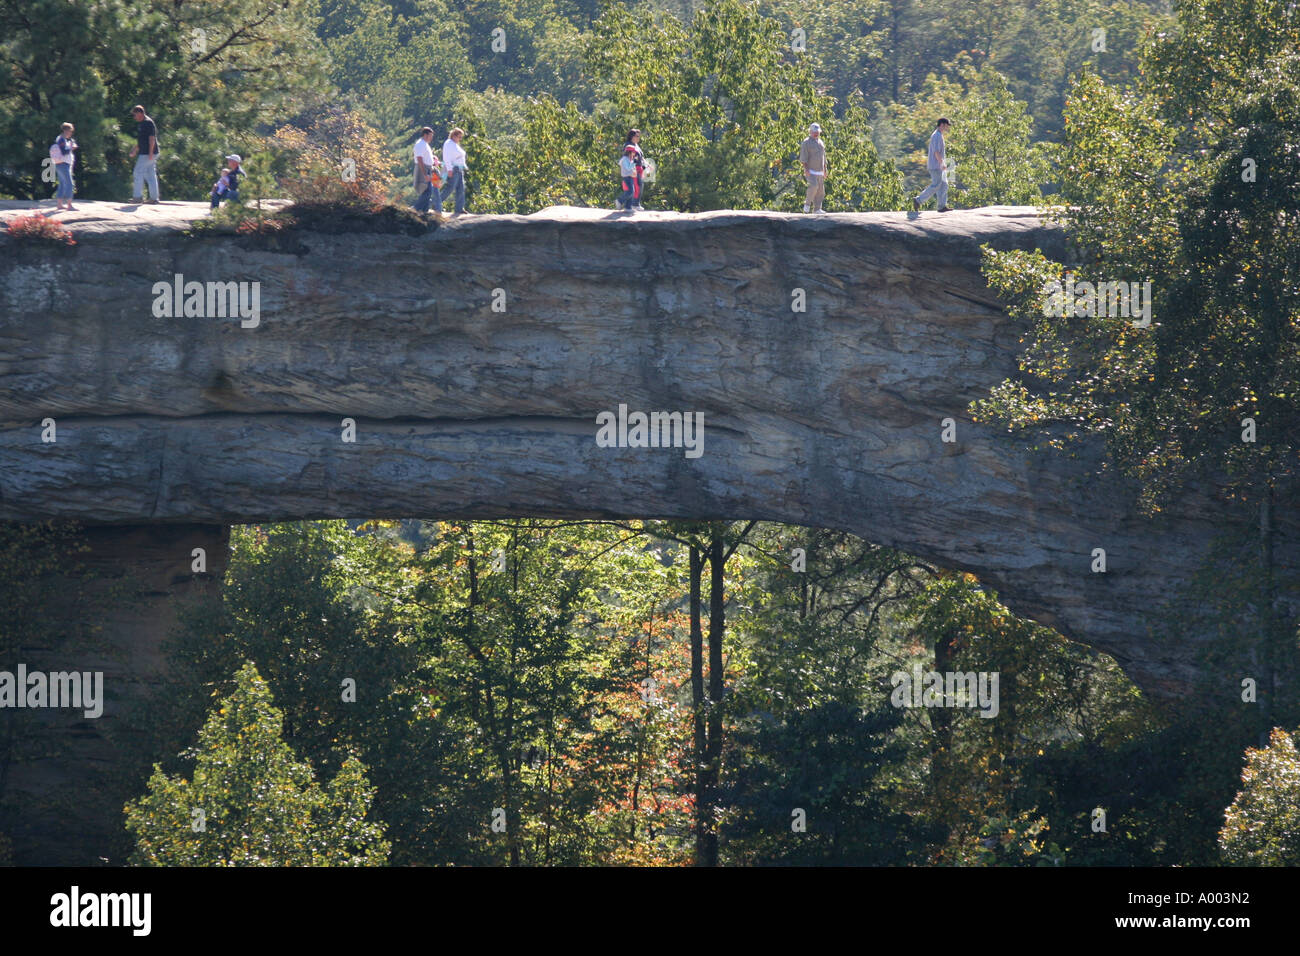 Natural Bridge state park sandstone arch Red River gorge kentucky Stock Photo